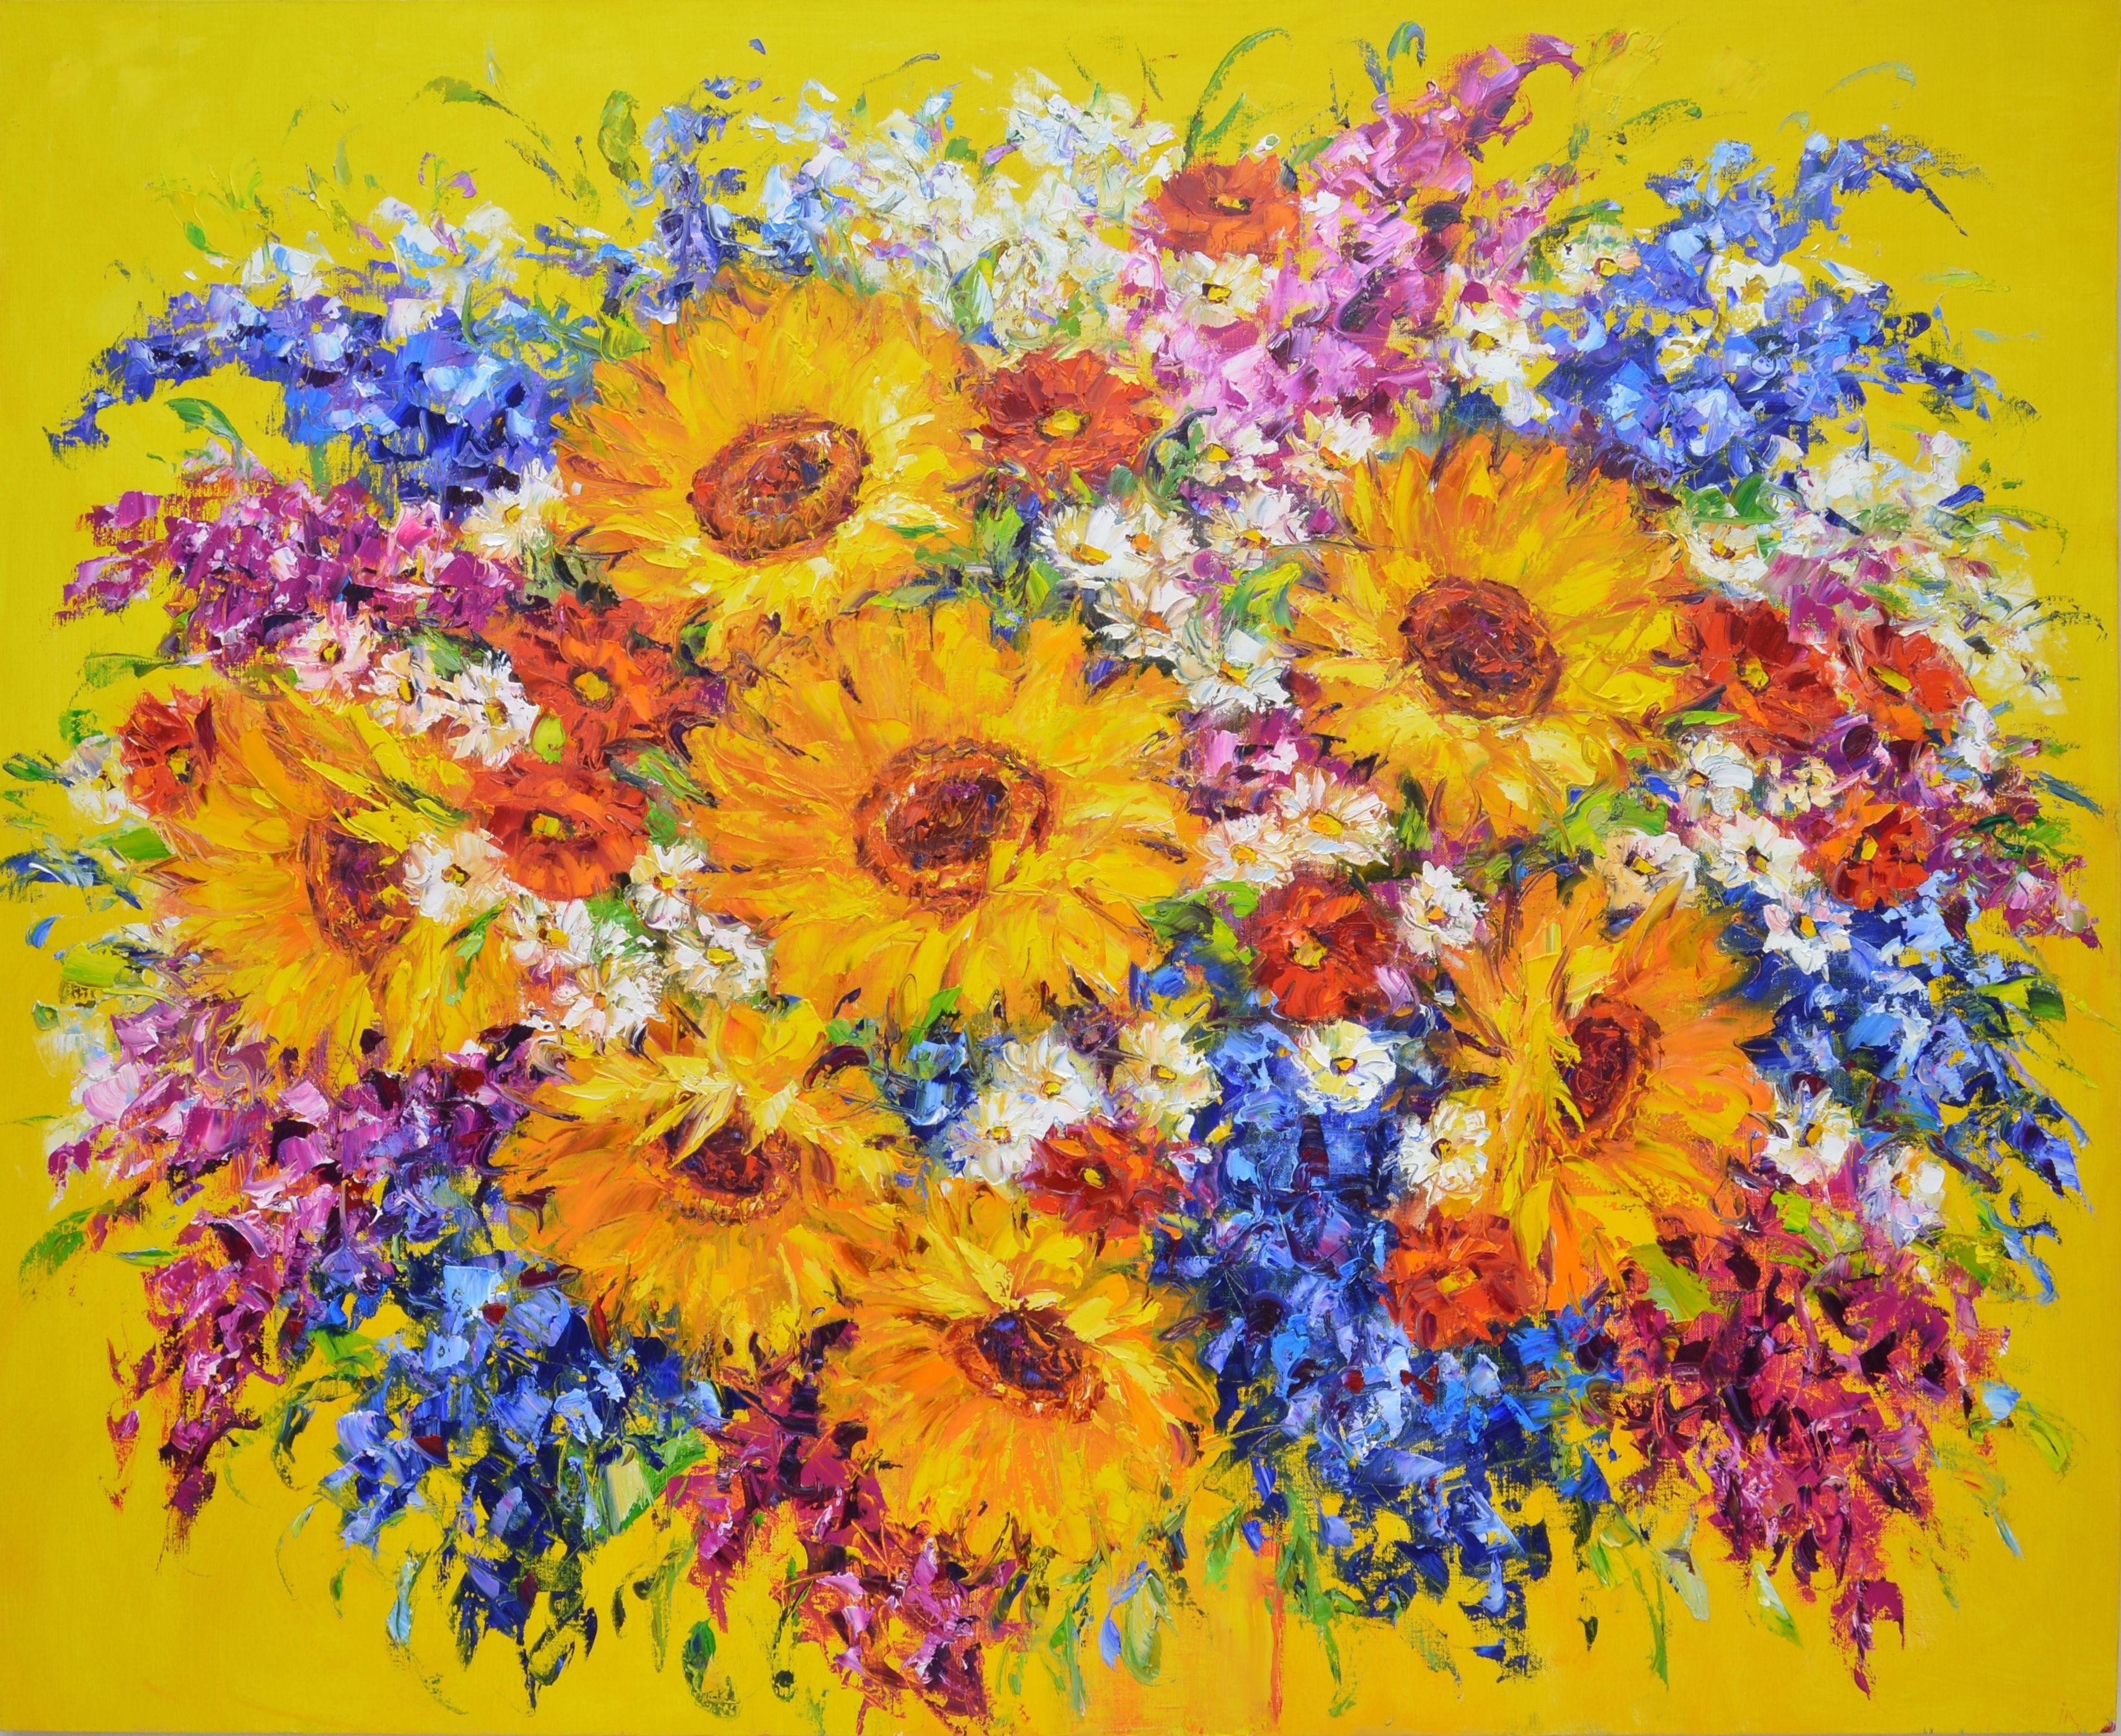 Shiny sunflowers, white daisies, lavender flowers of red, pink and purple in an oblong composition created by tassels and a spatula. Part of an ongoing series of floral still lifes. The painting has good spatial quality, and bright colors cause